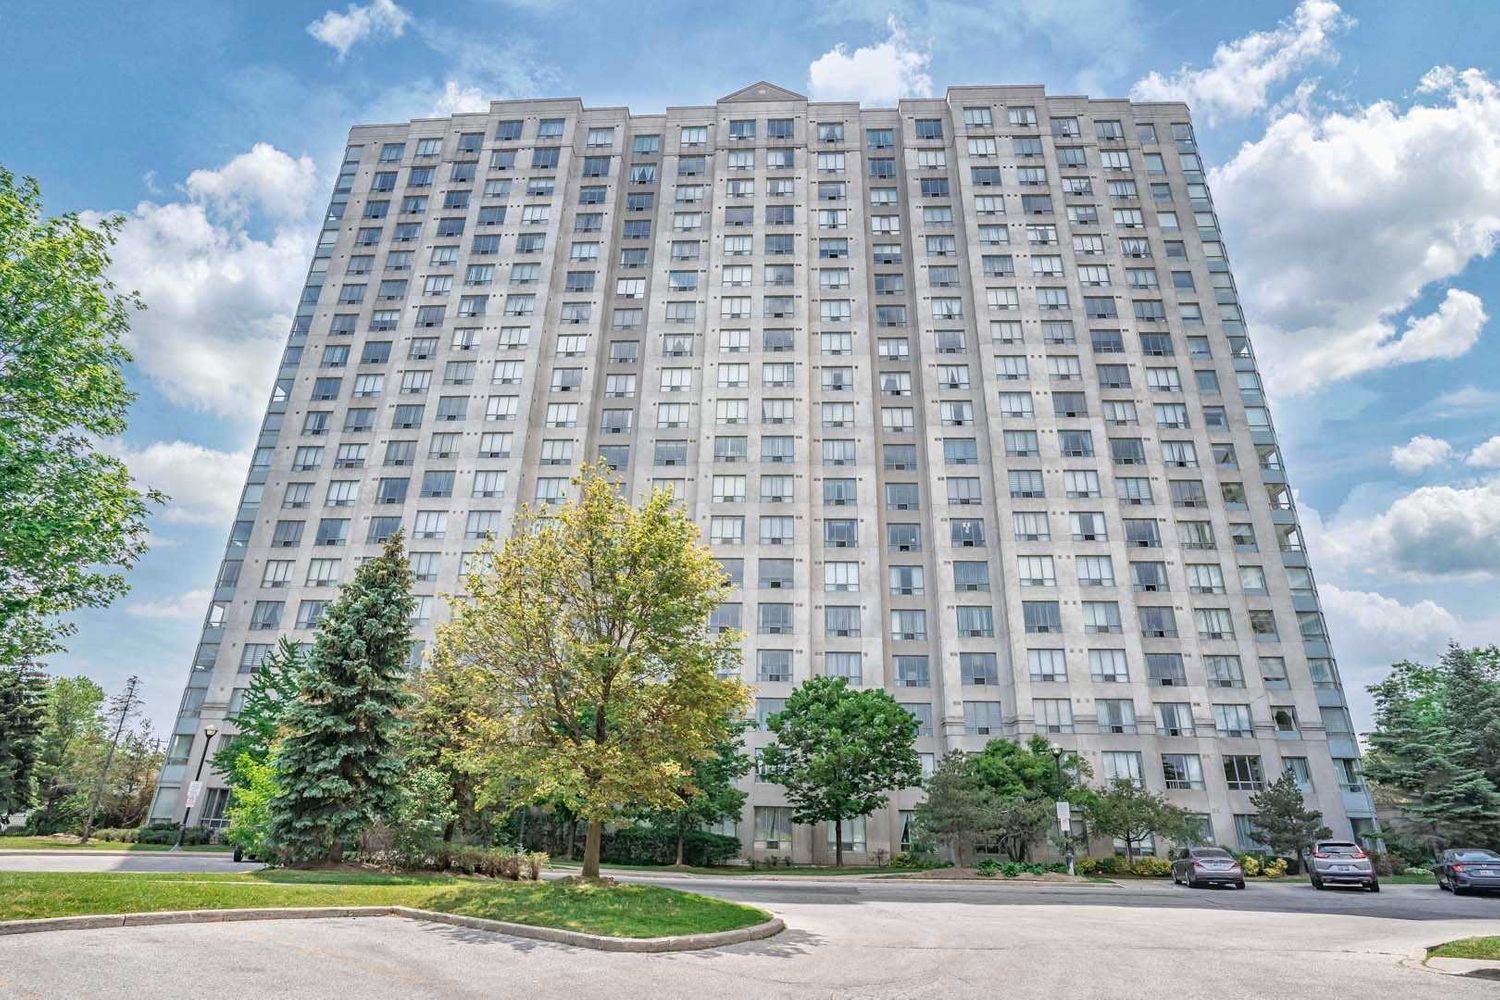 2627 Mccowan Road. Windsor II Condos is located in  Scarborough, Toronto - image #1 of 2